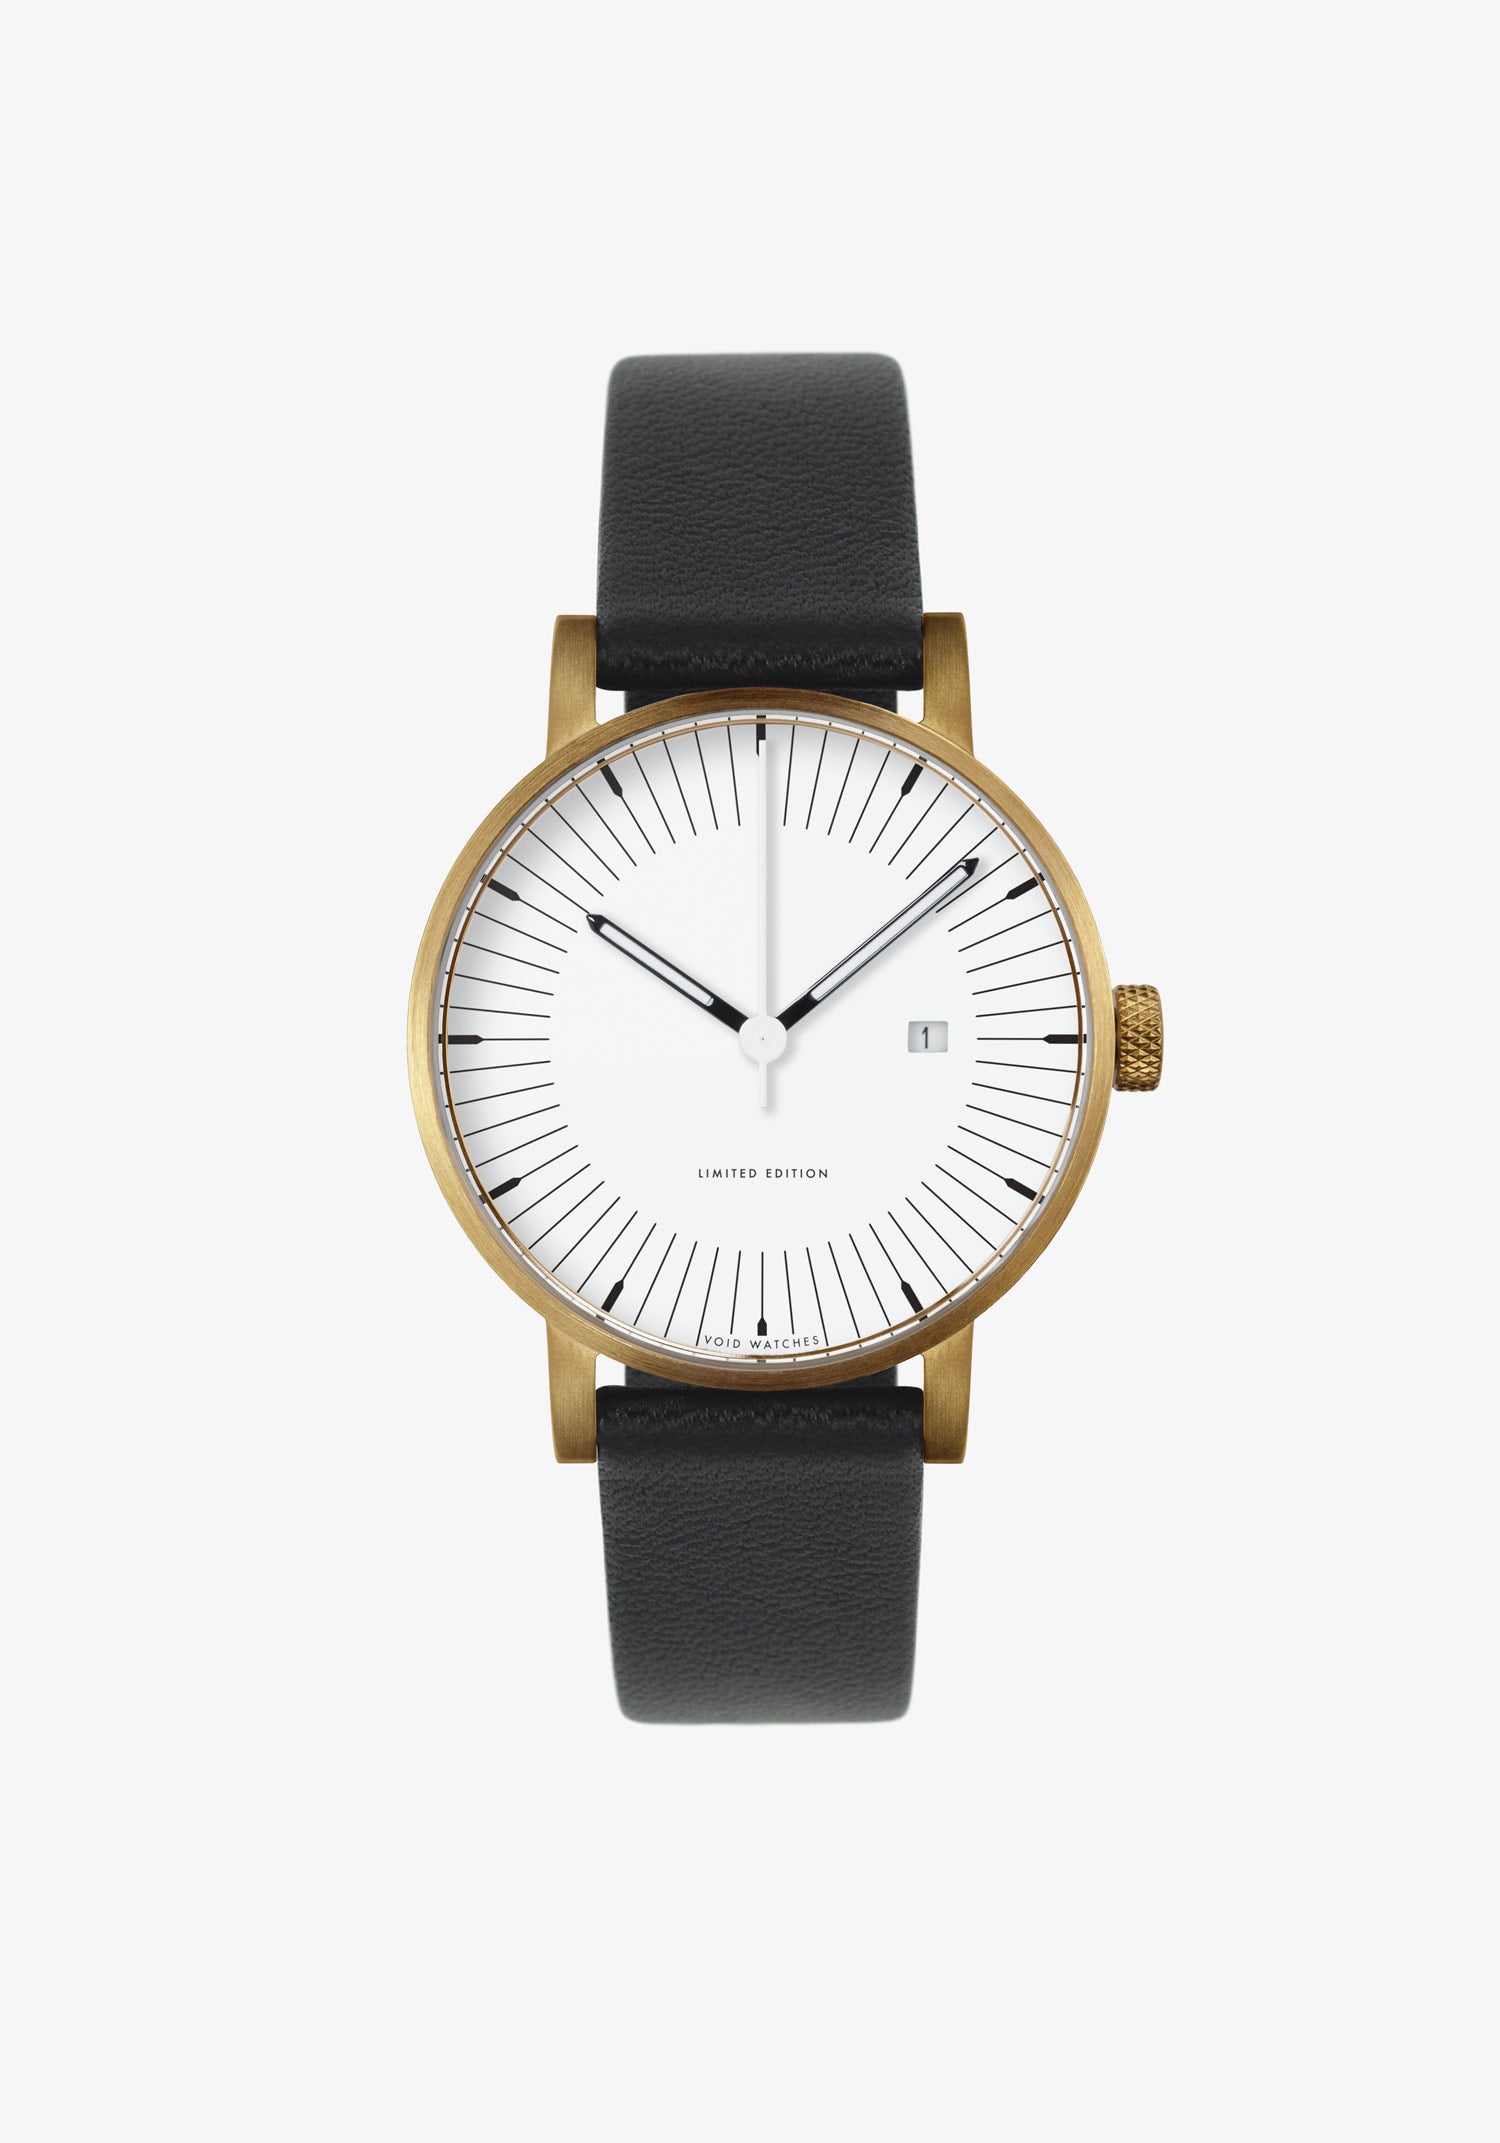 The MoMA-MkII by VOID Watches. A limited edition 70s inspired watch with black leather straps and a gold case.